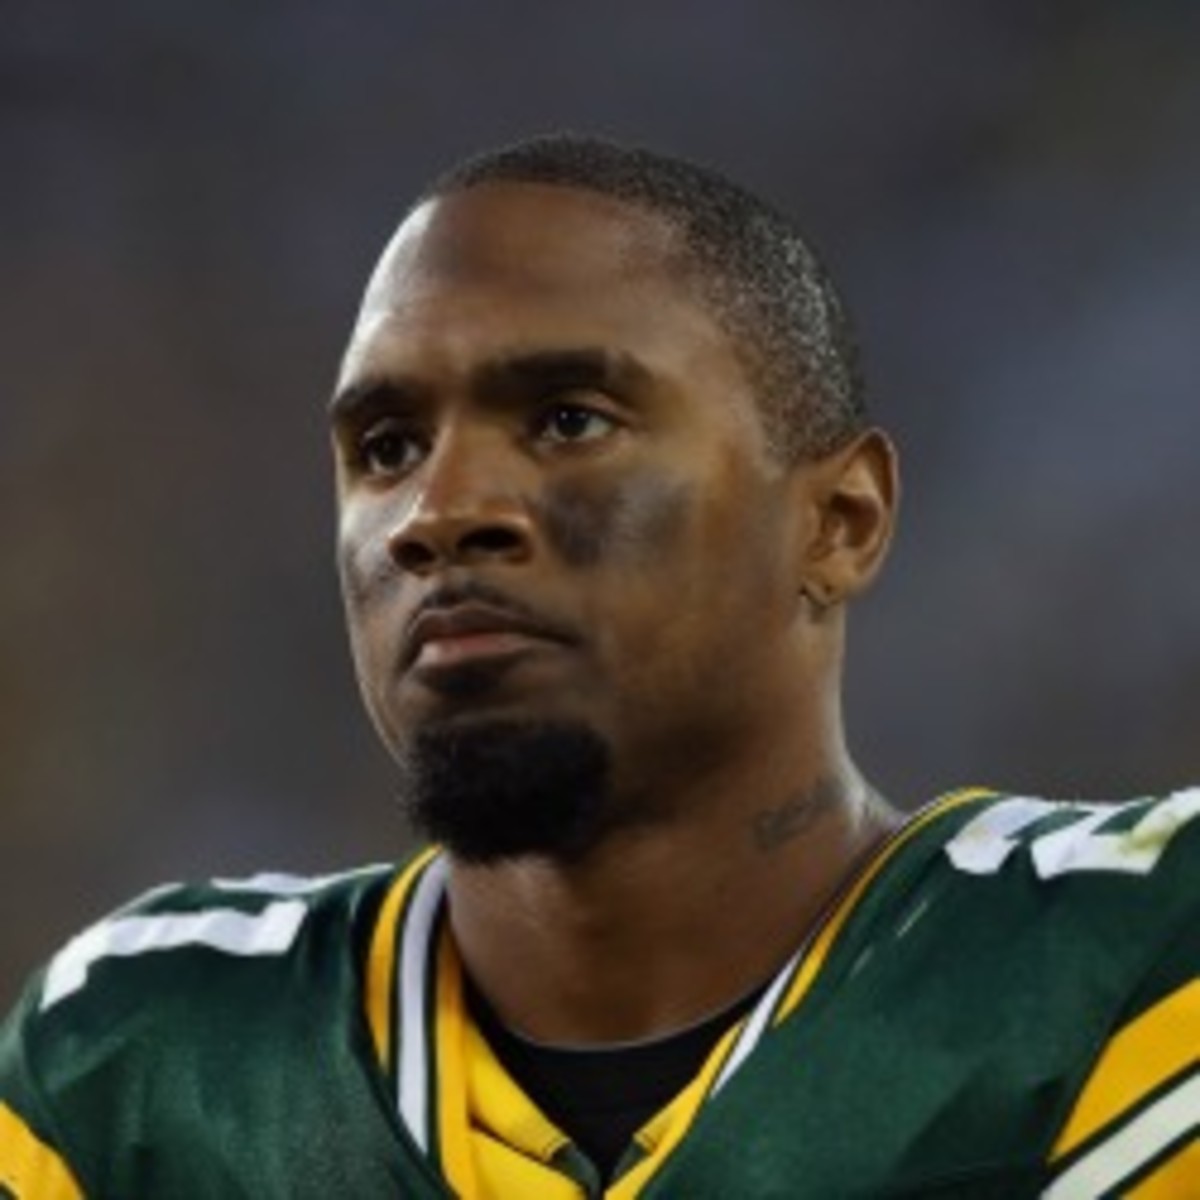 Packers safety Charles Woodson has been sidelined since breaking his collarbone on Oct. 21. (Jeff Gross/Getty Images)